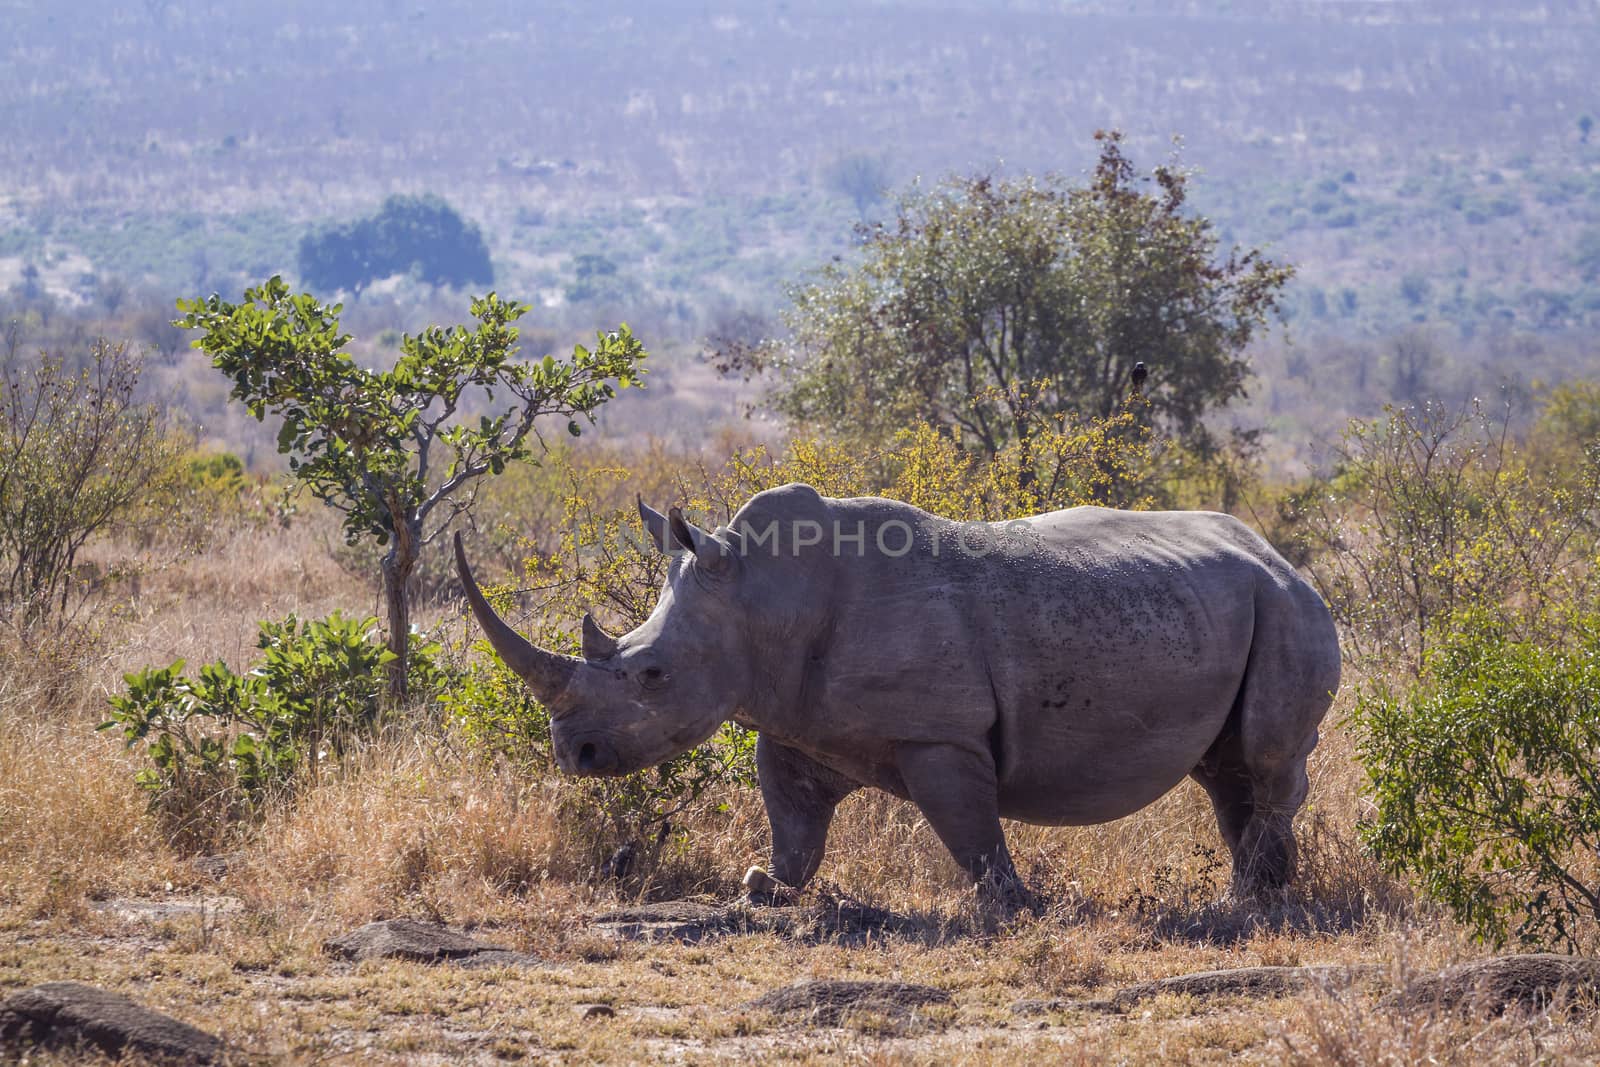 Southern white rhinoceros in Kruger National park, South Africa by PACOCOMO